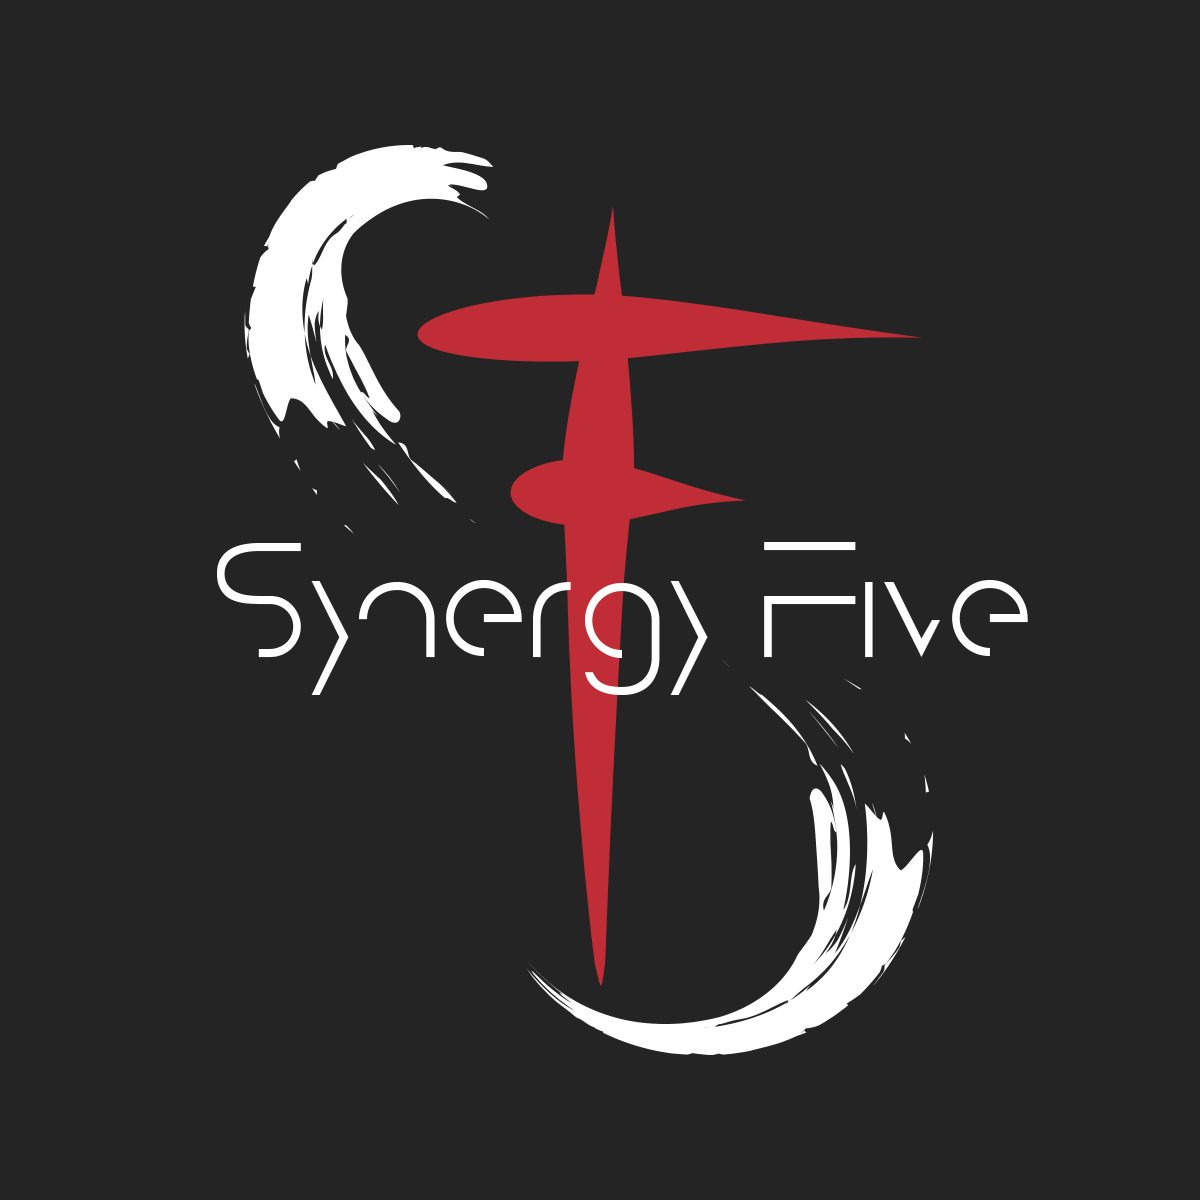 Synergy Five